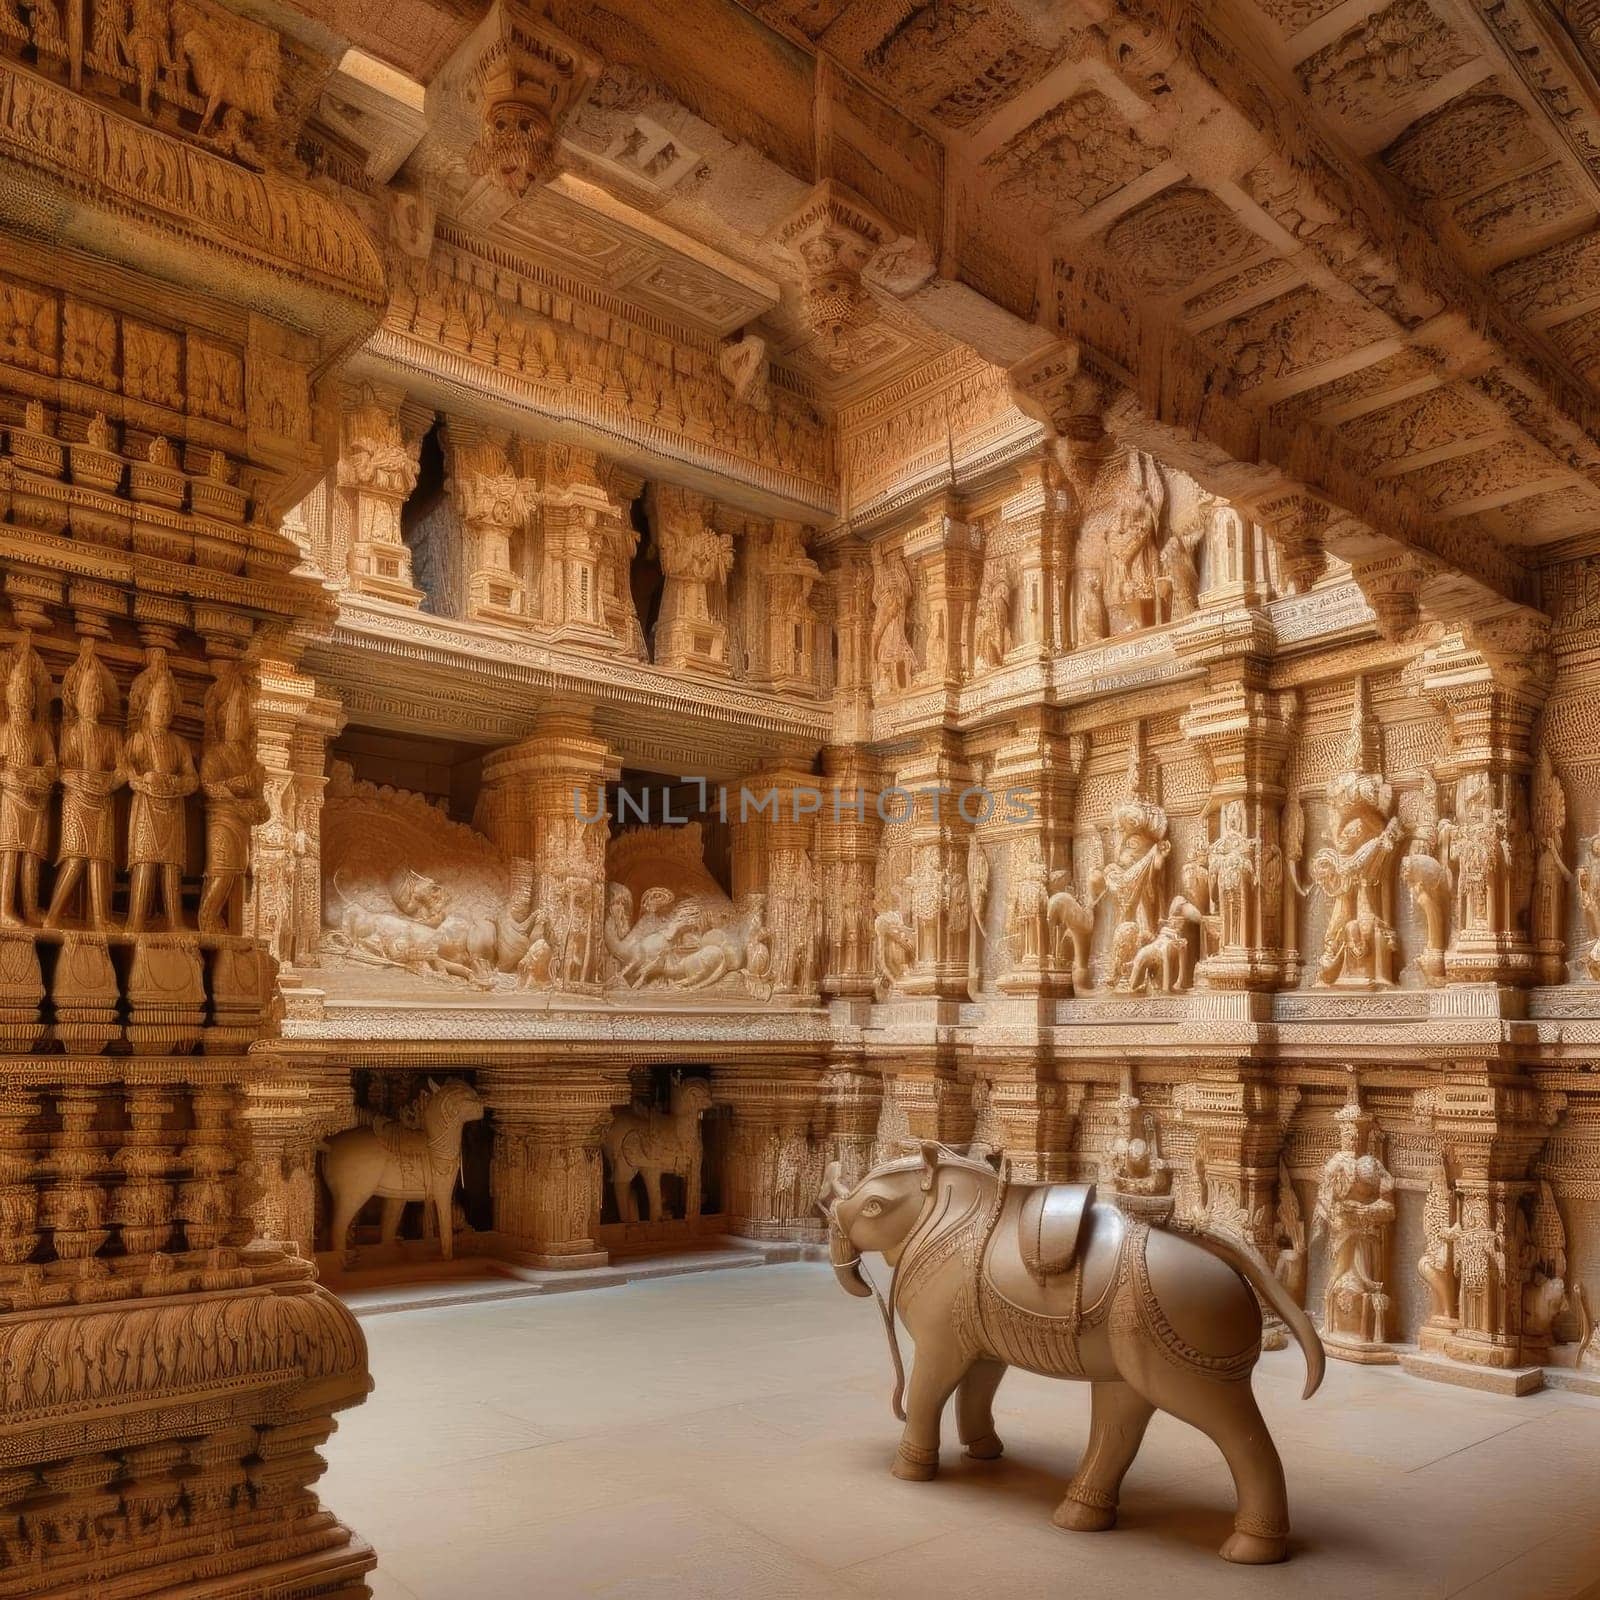 Carved elephant in exotic temple (ID: 001289)